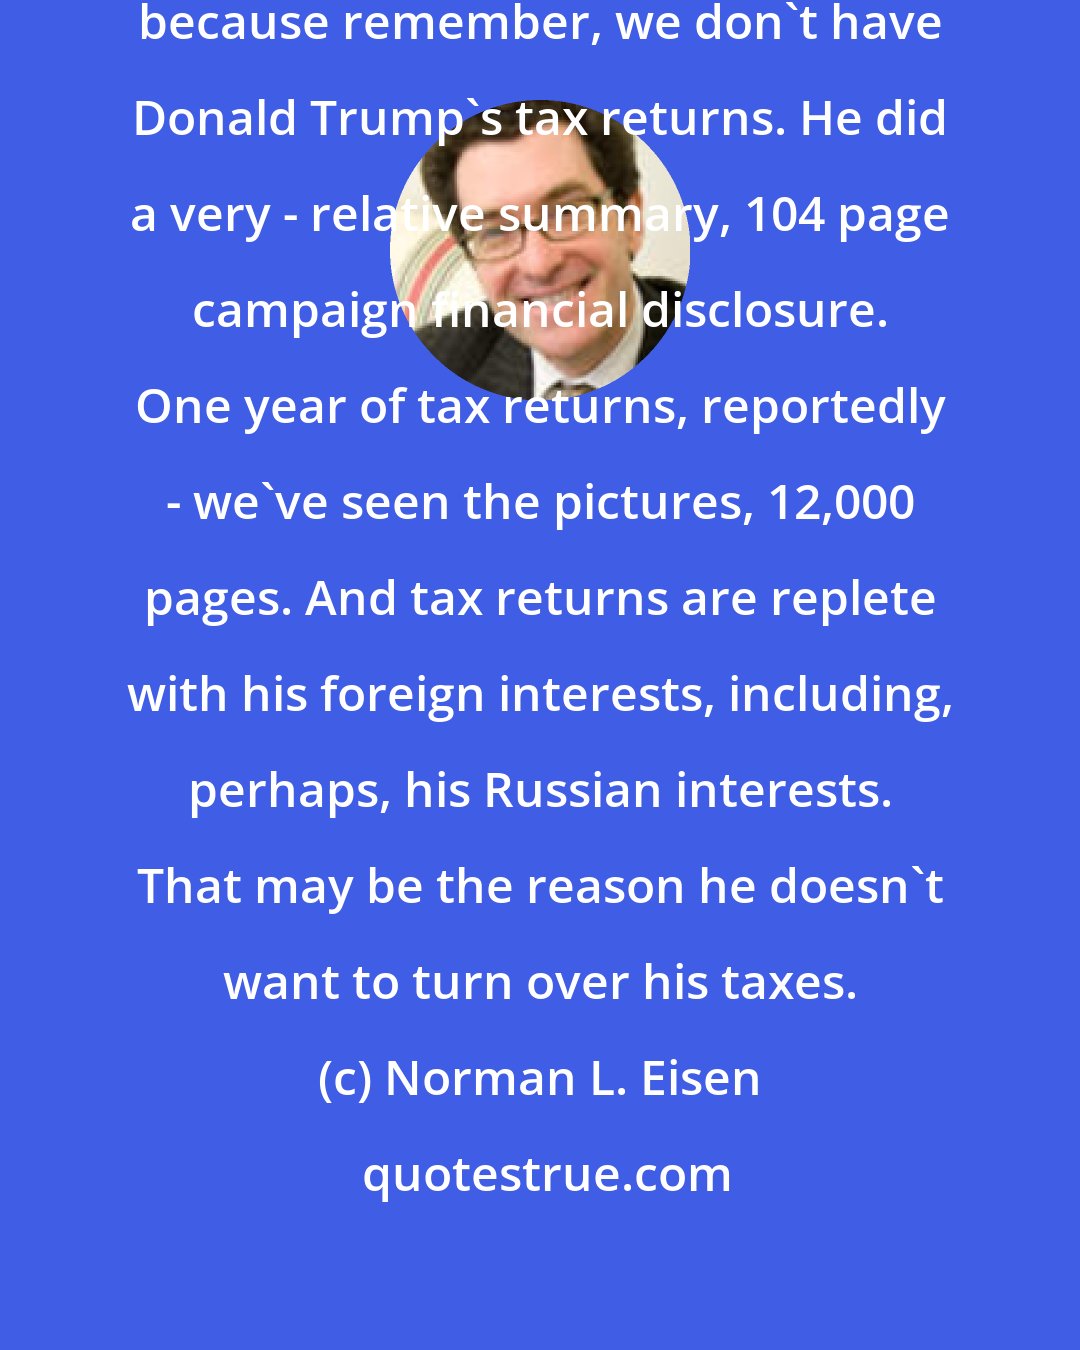 Norman L. Eisen: There's a Russia angle to all this, because remember, we don't have Donald Trump's tax returns. He did a very - relative summary, 104 page campaign financial disclosure. One year of tax returns, reportedly - we've seen the pictures, 12,000 pages. And tax returns are replete with his foreign interests, including, perhaps, his Russian interests. That may be the reason he doesn't want to turn over his taxes.